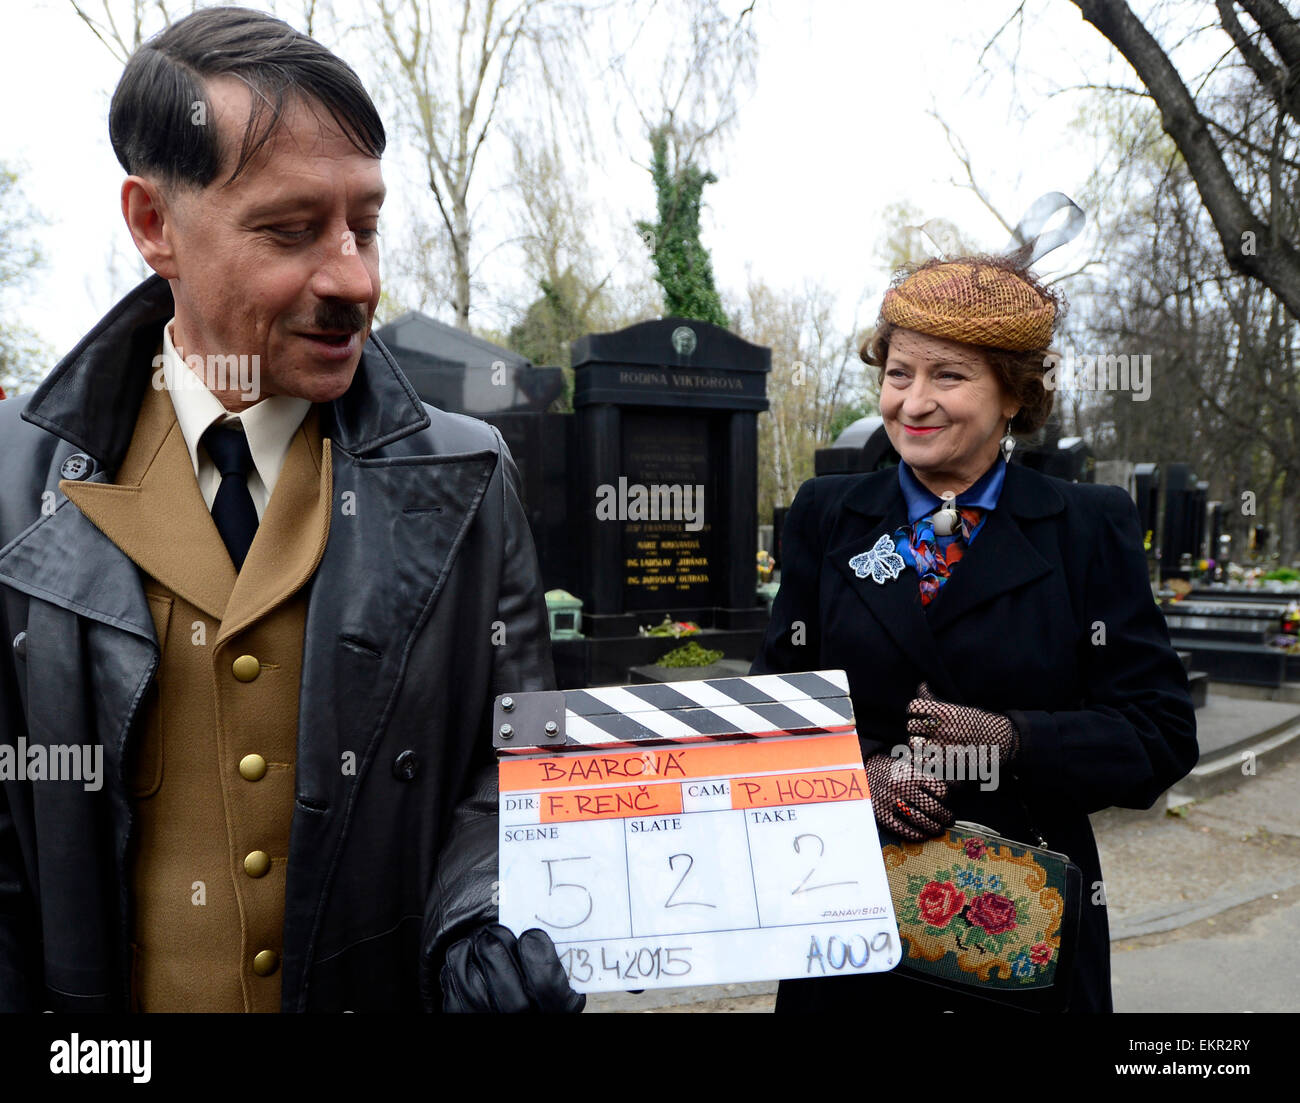 Shooting of the film about Czechoslovak film star Lida Baarova starts in the Olsany cemetary, Prague, Czech Republic, April 13, 2015. Pictured from left: Pavel Kriz and Simona Stasova. The lead role in the prepared Czech film about actress Baarova, who was mistress of Nazi Germany´s Propaganda Minister Joseph Goebbels before the war, will play Slovak actress Tana Pauhofova. Stock Photo